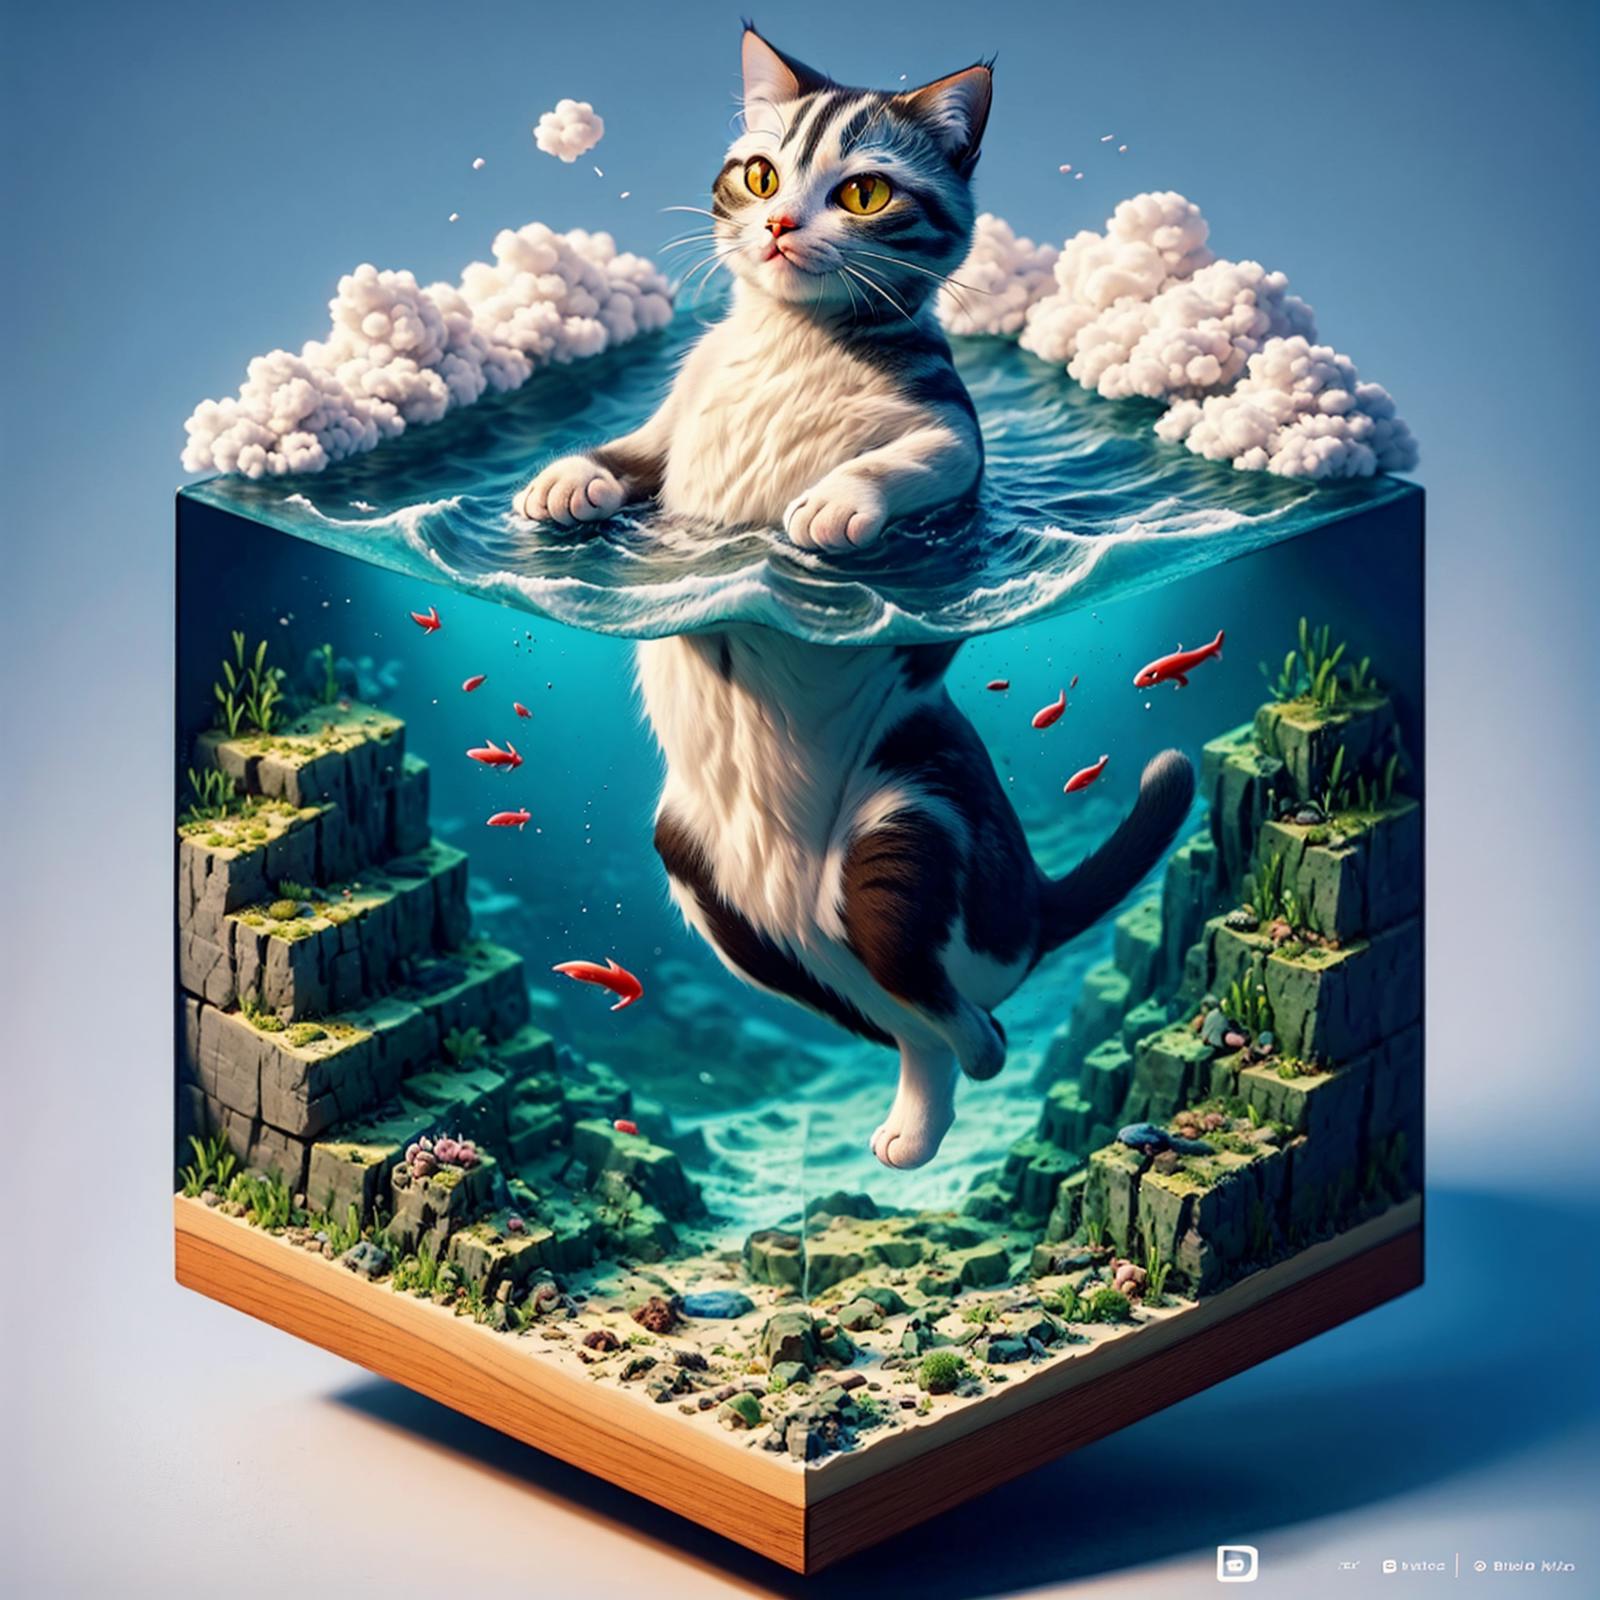 A painting of a cat in the water.